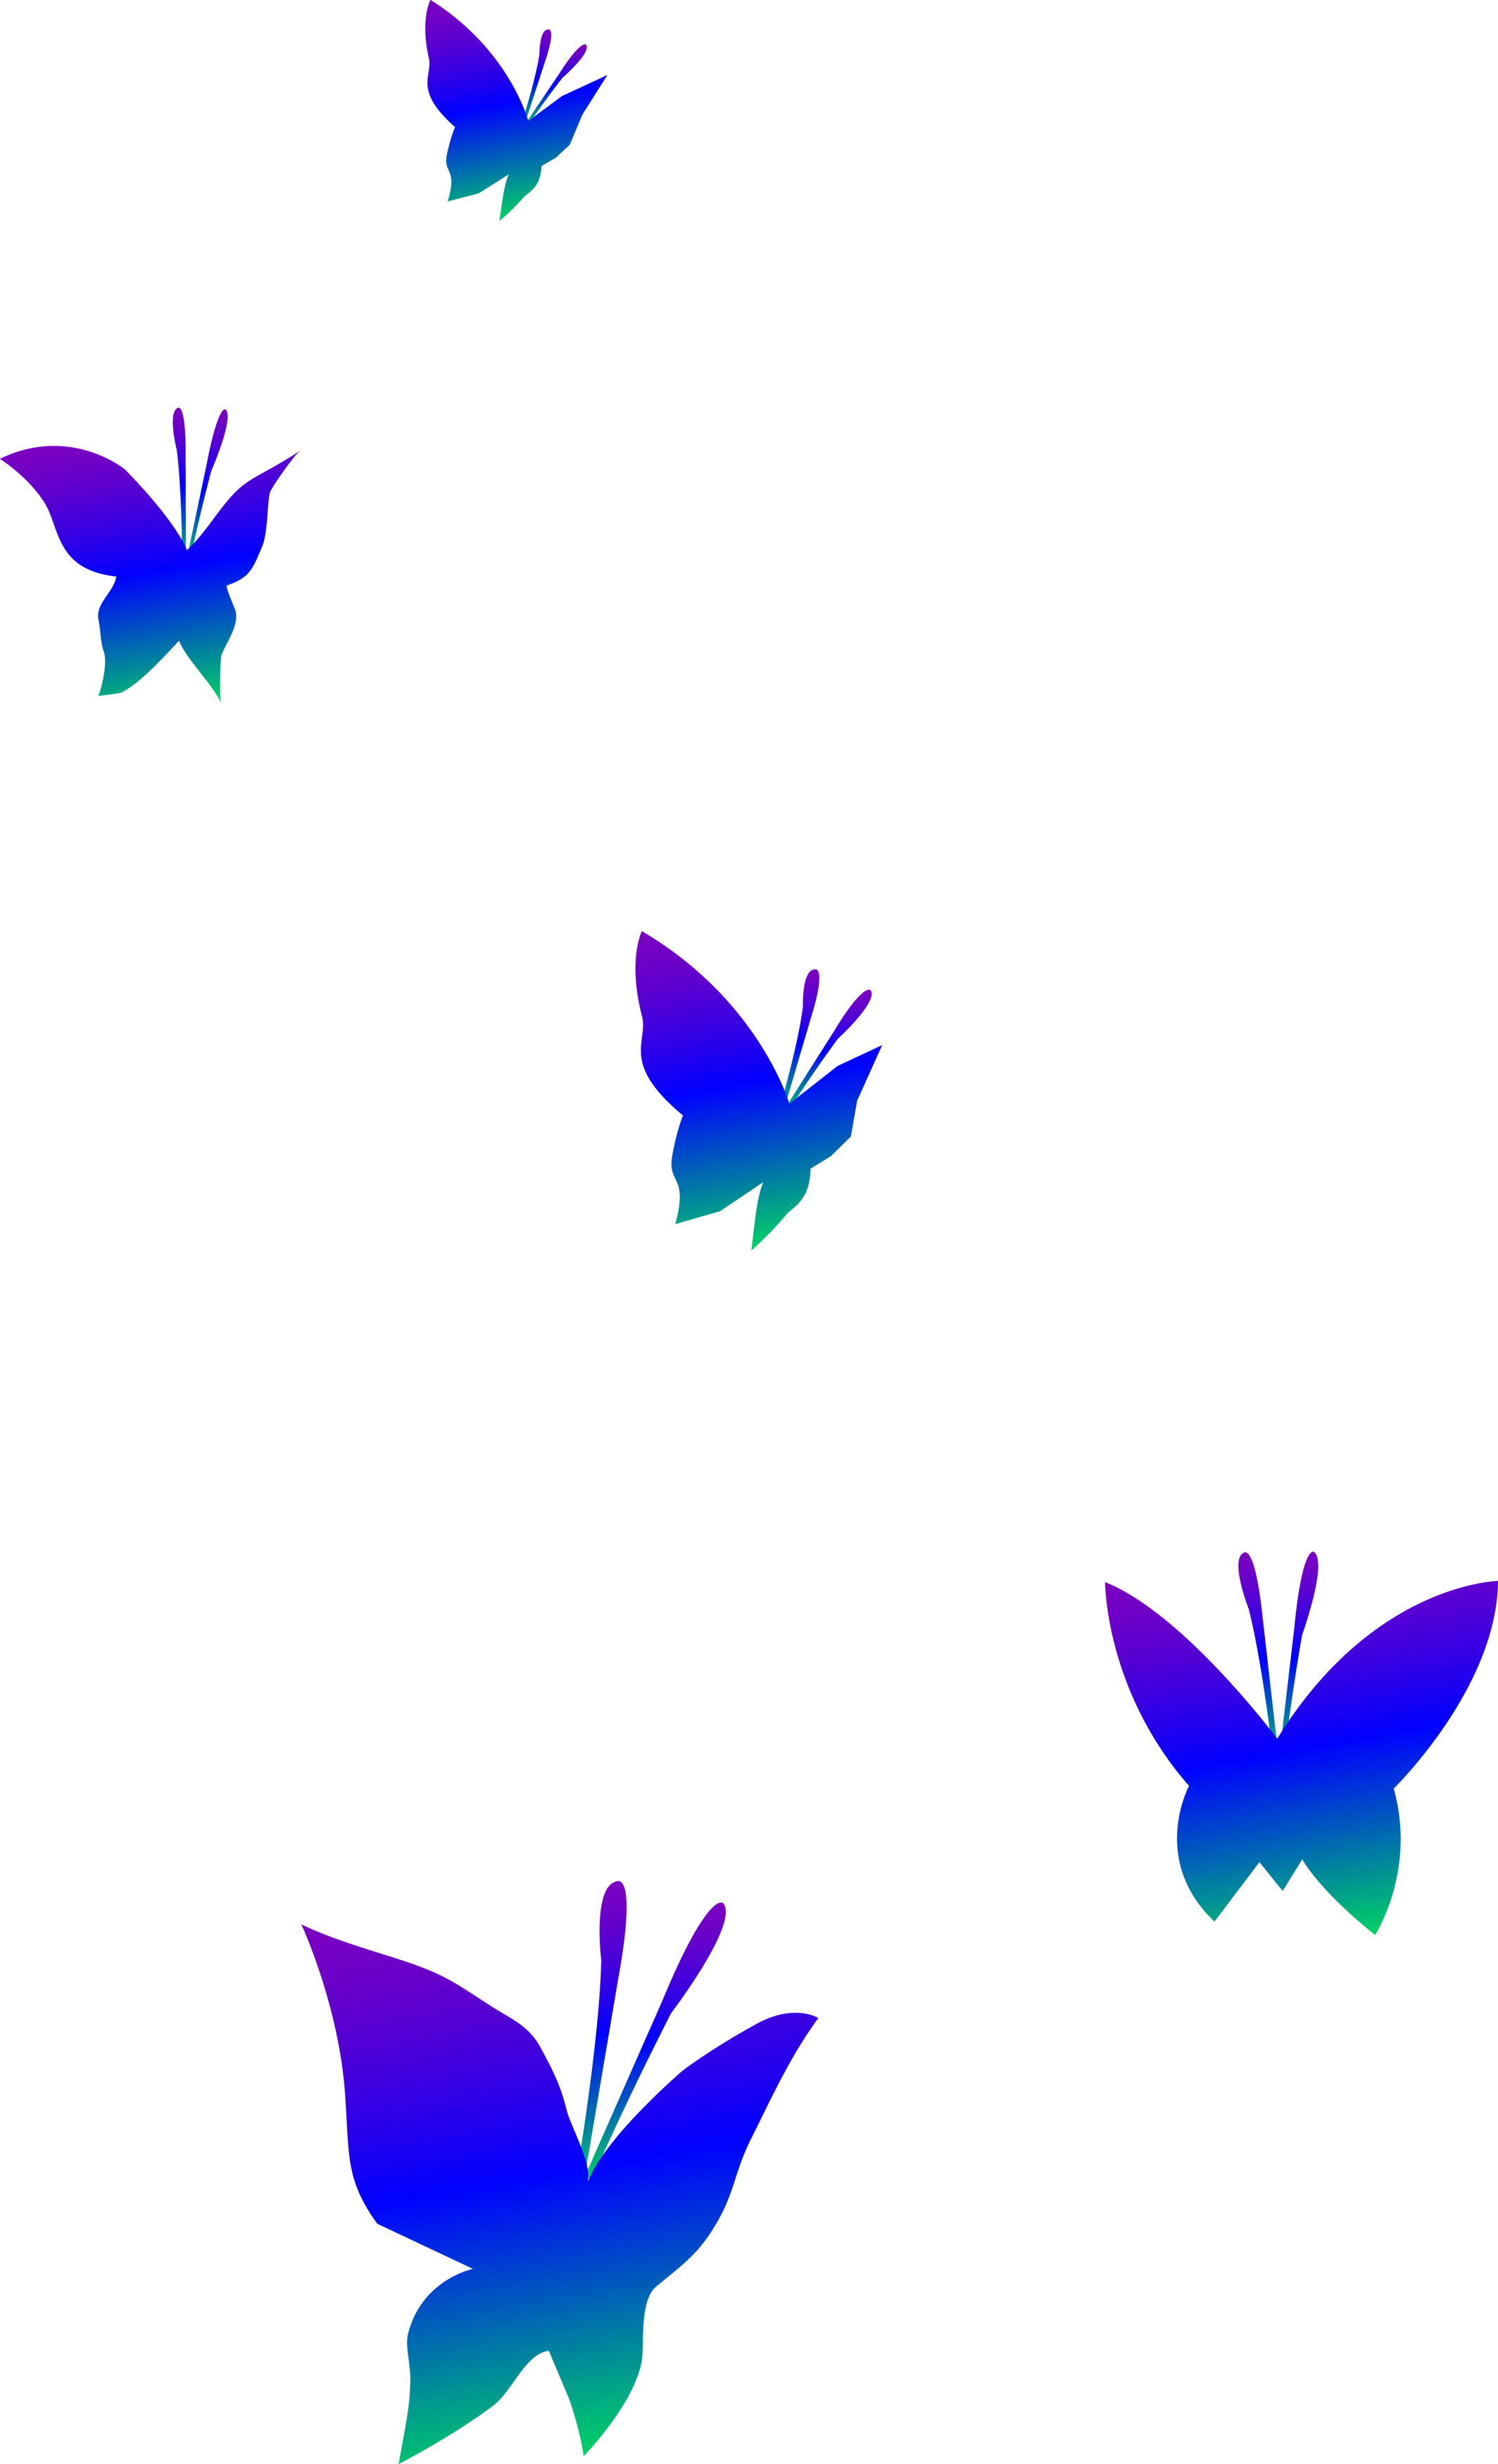 Blue Butterfly Clip Art – Clipart Free Download